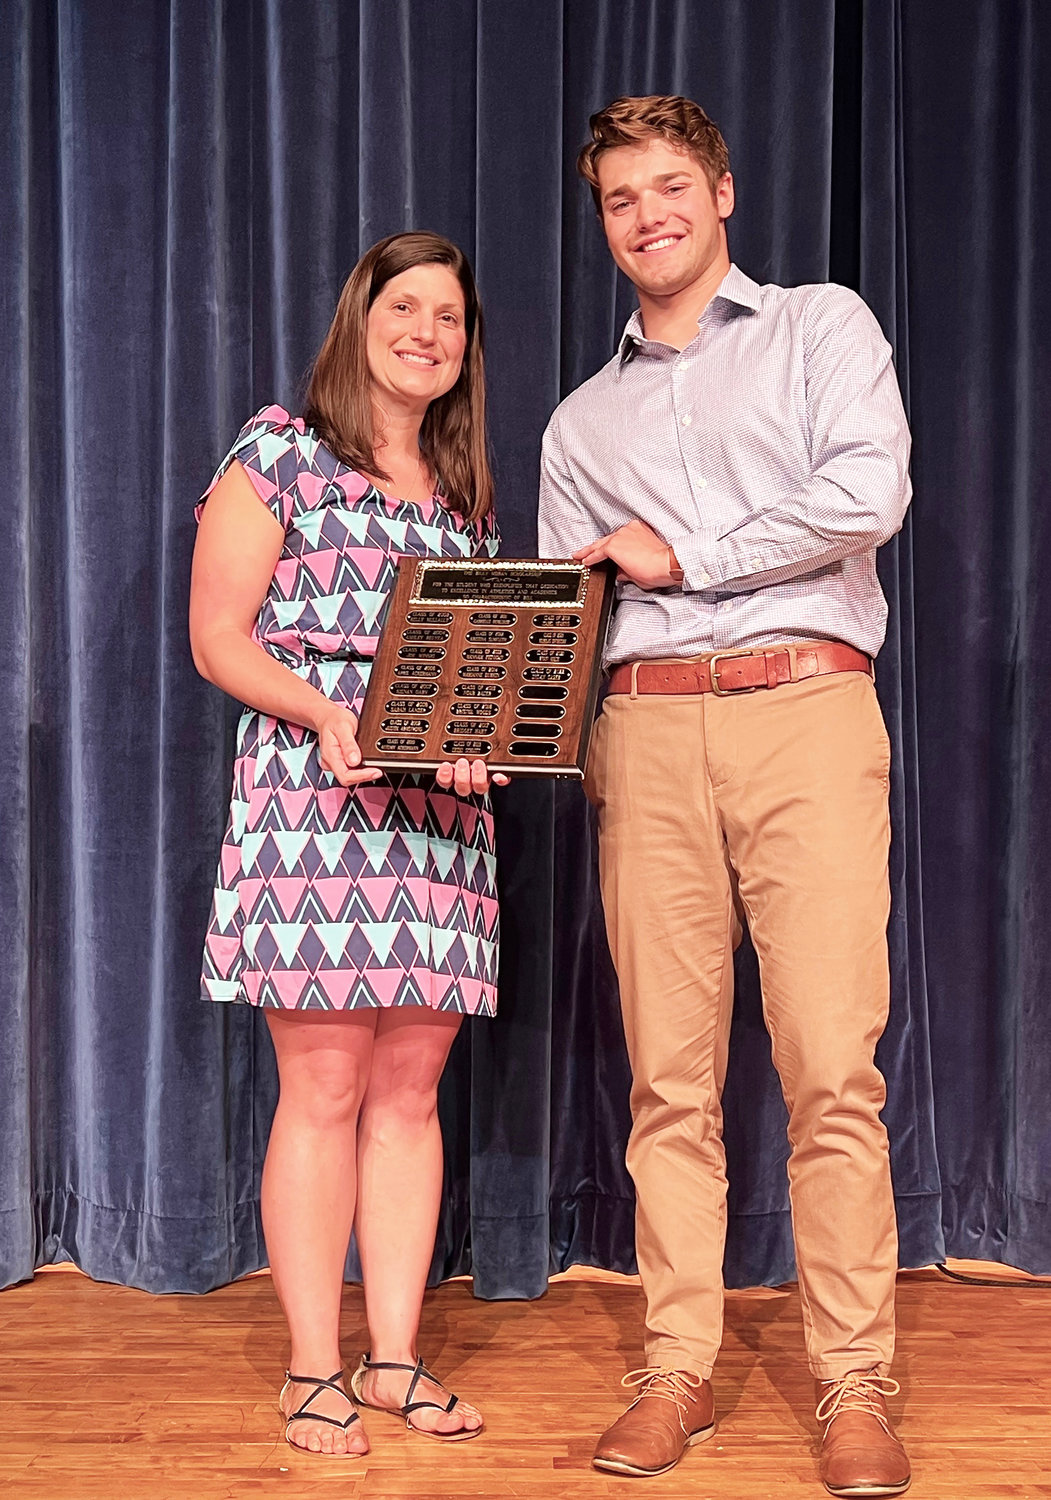 Dylan Sager was this year’s winner of the Billy Moran Scholarship presented by Billy’s youngest sister, Megan Moran Eggleton.